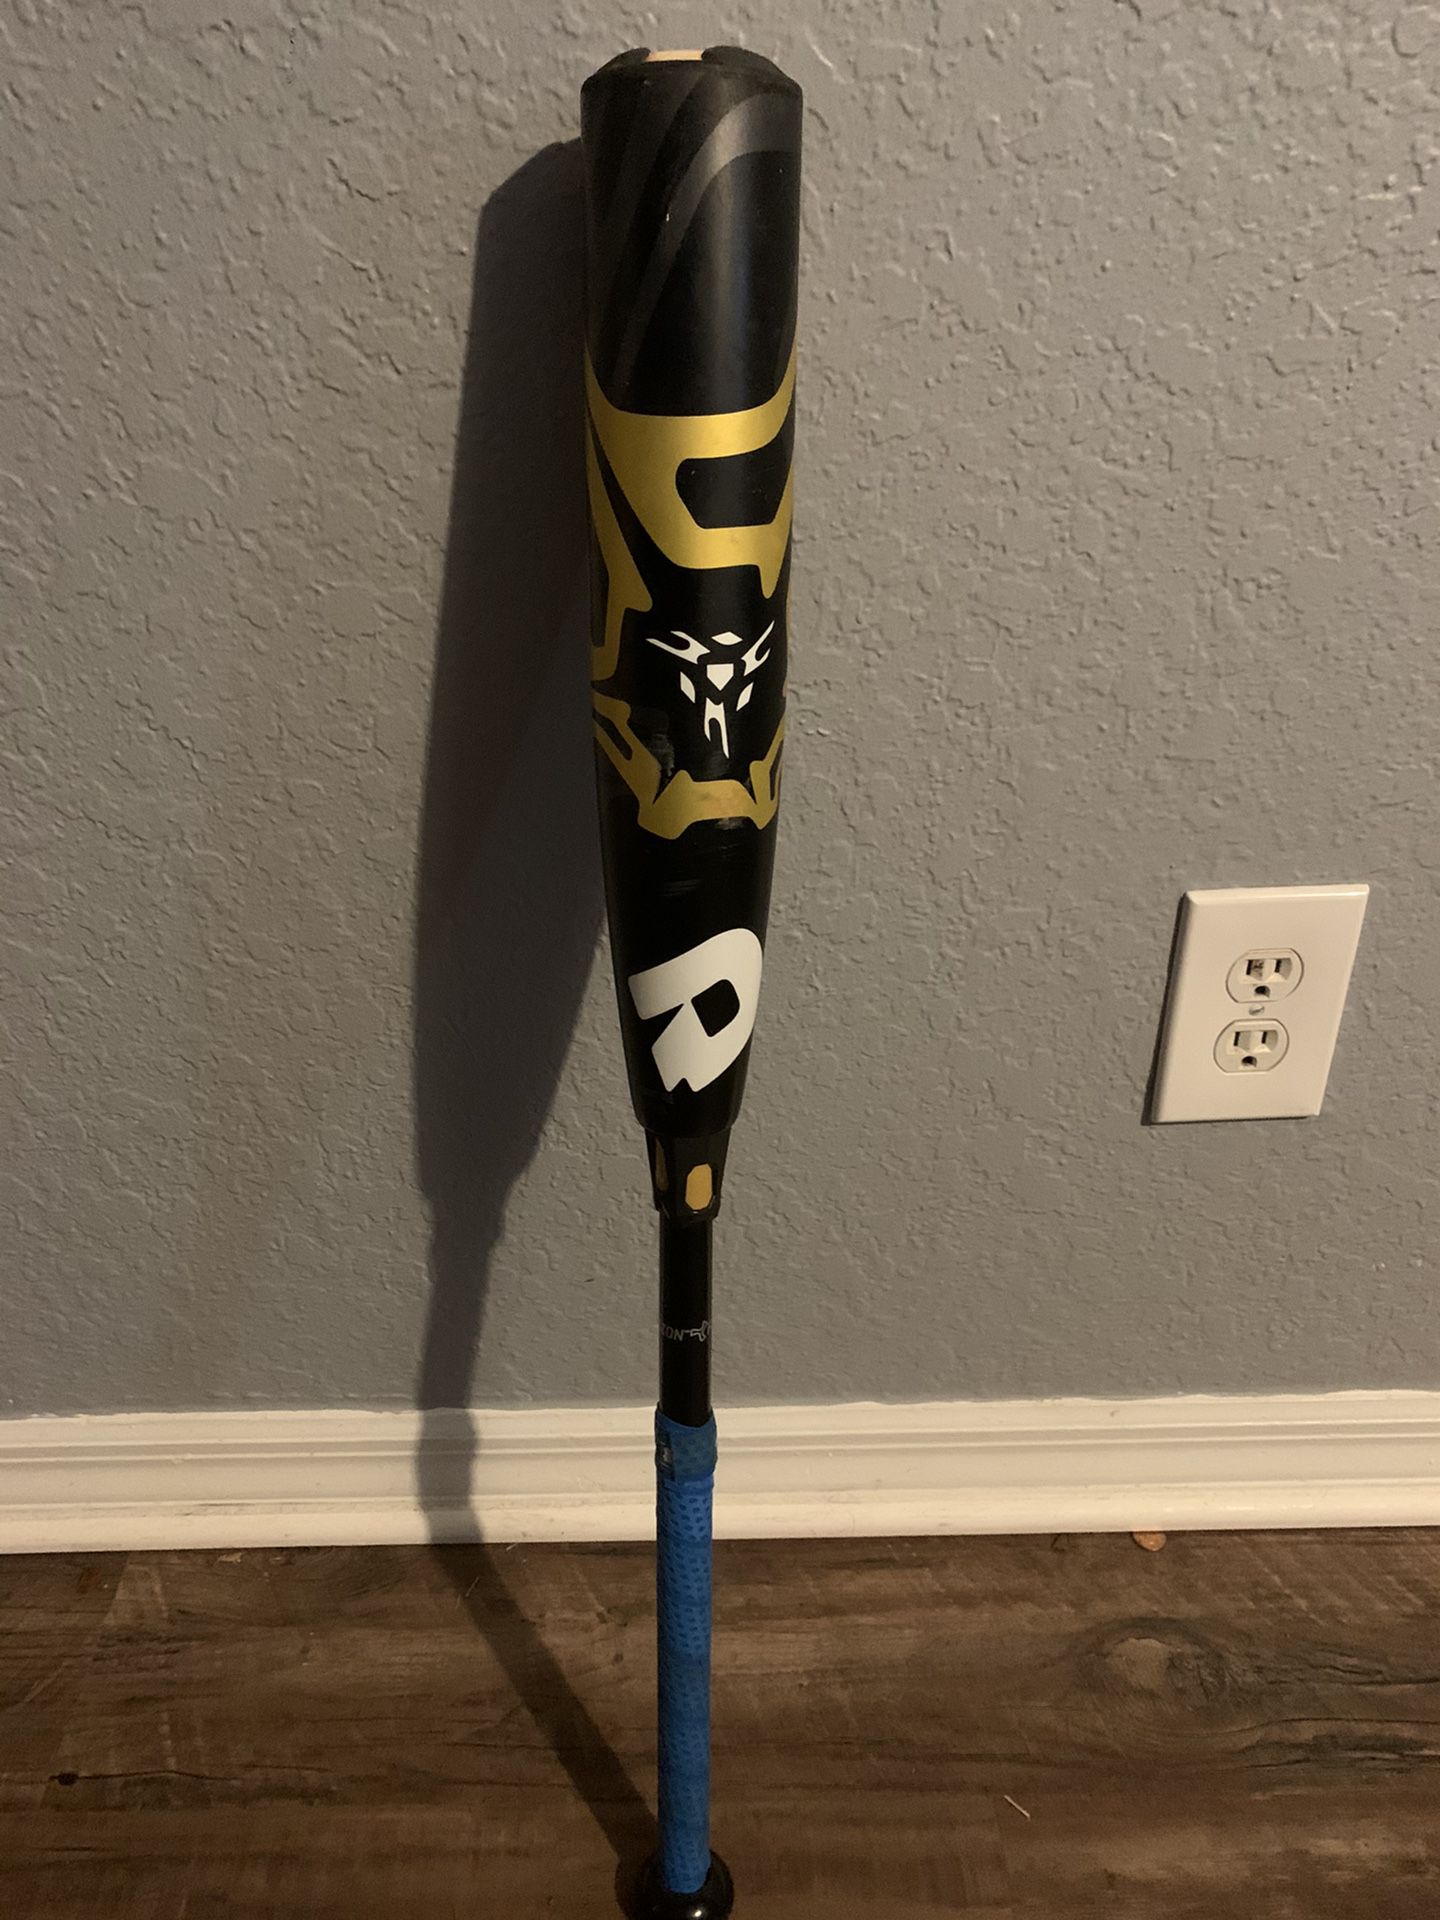 Demarini 29inch 19oz composite bat Only used a handful of times Retails at 349$